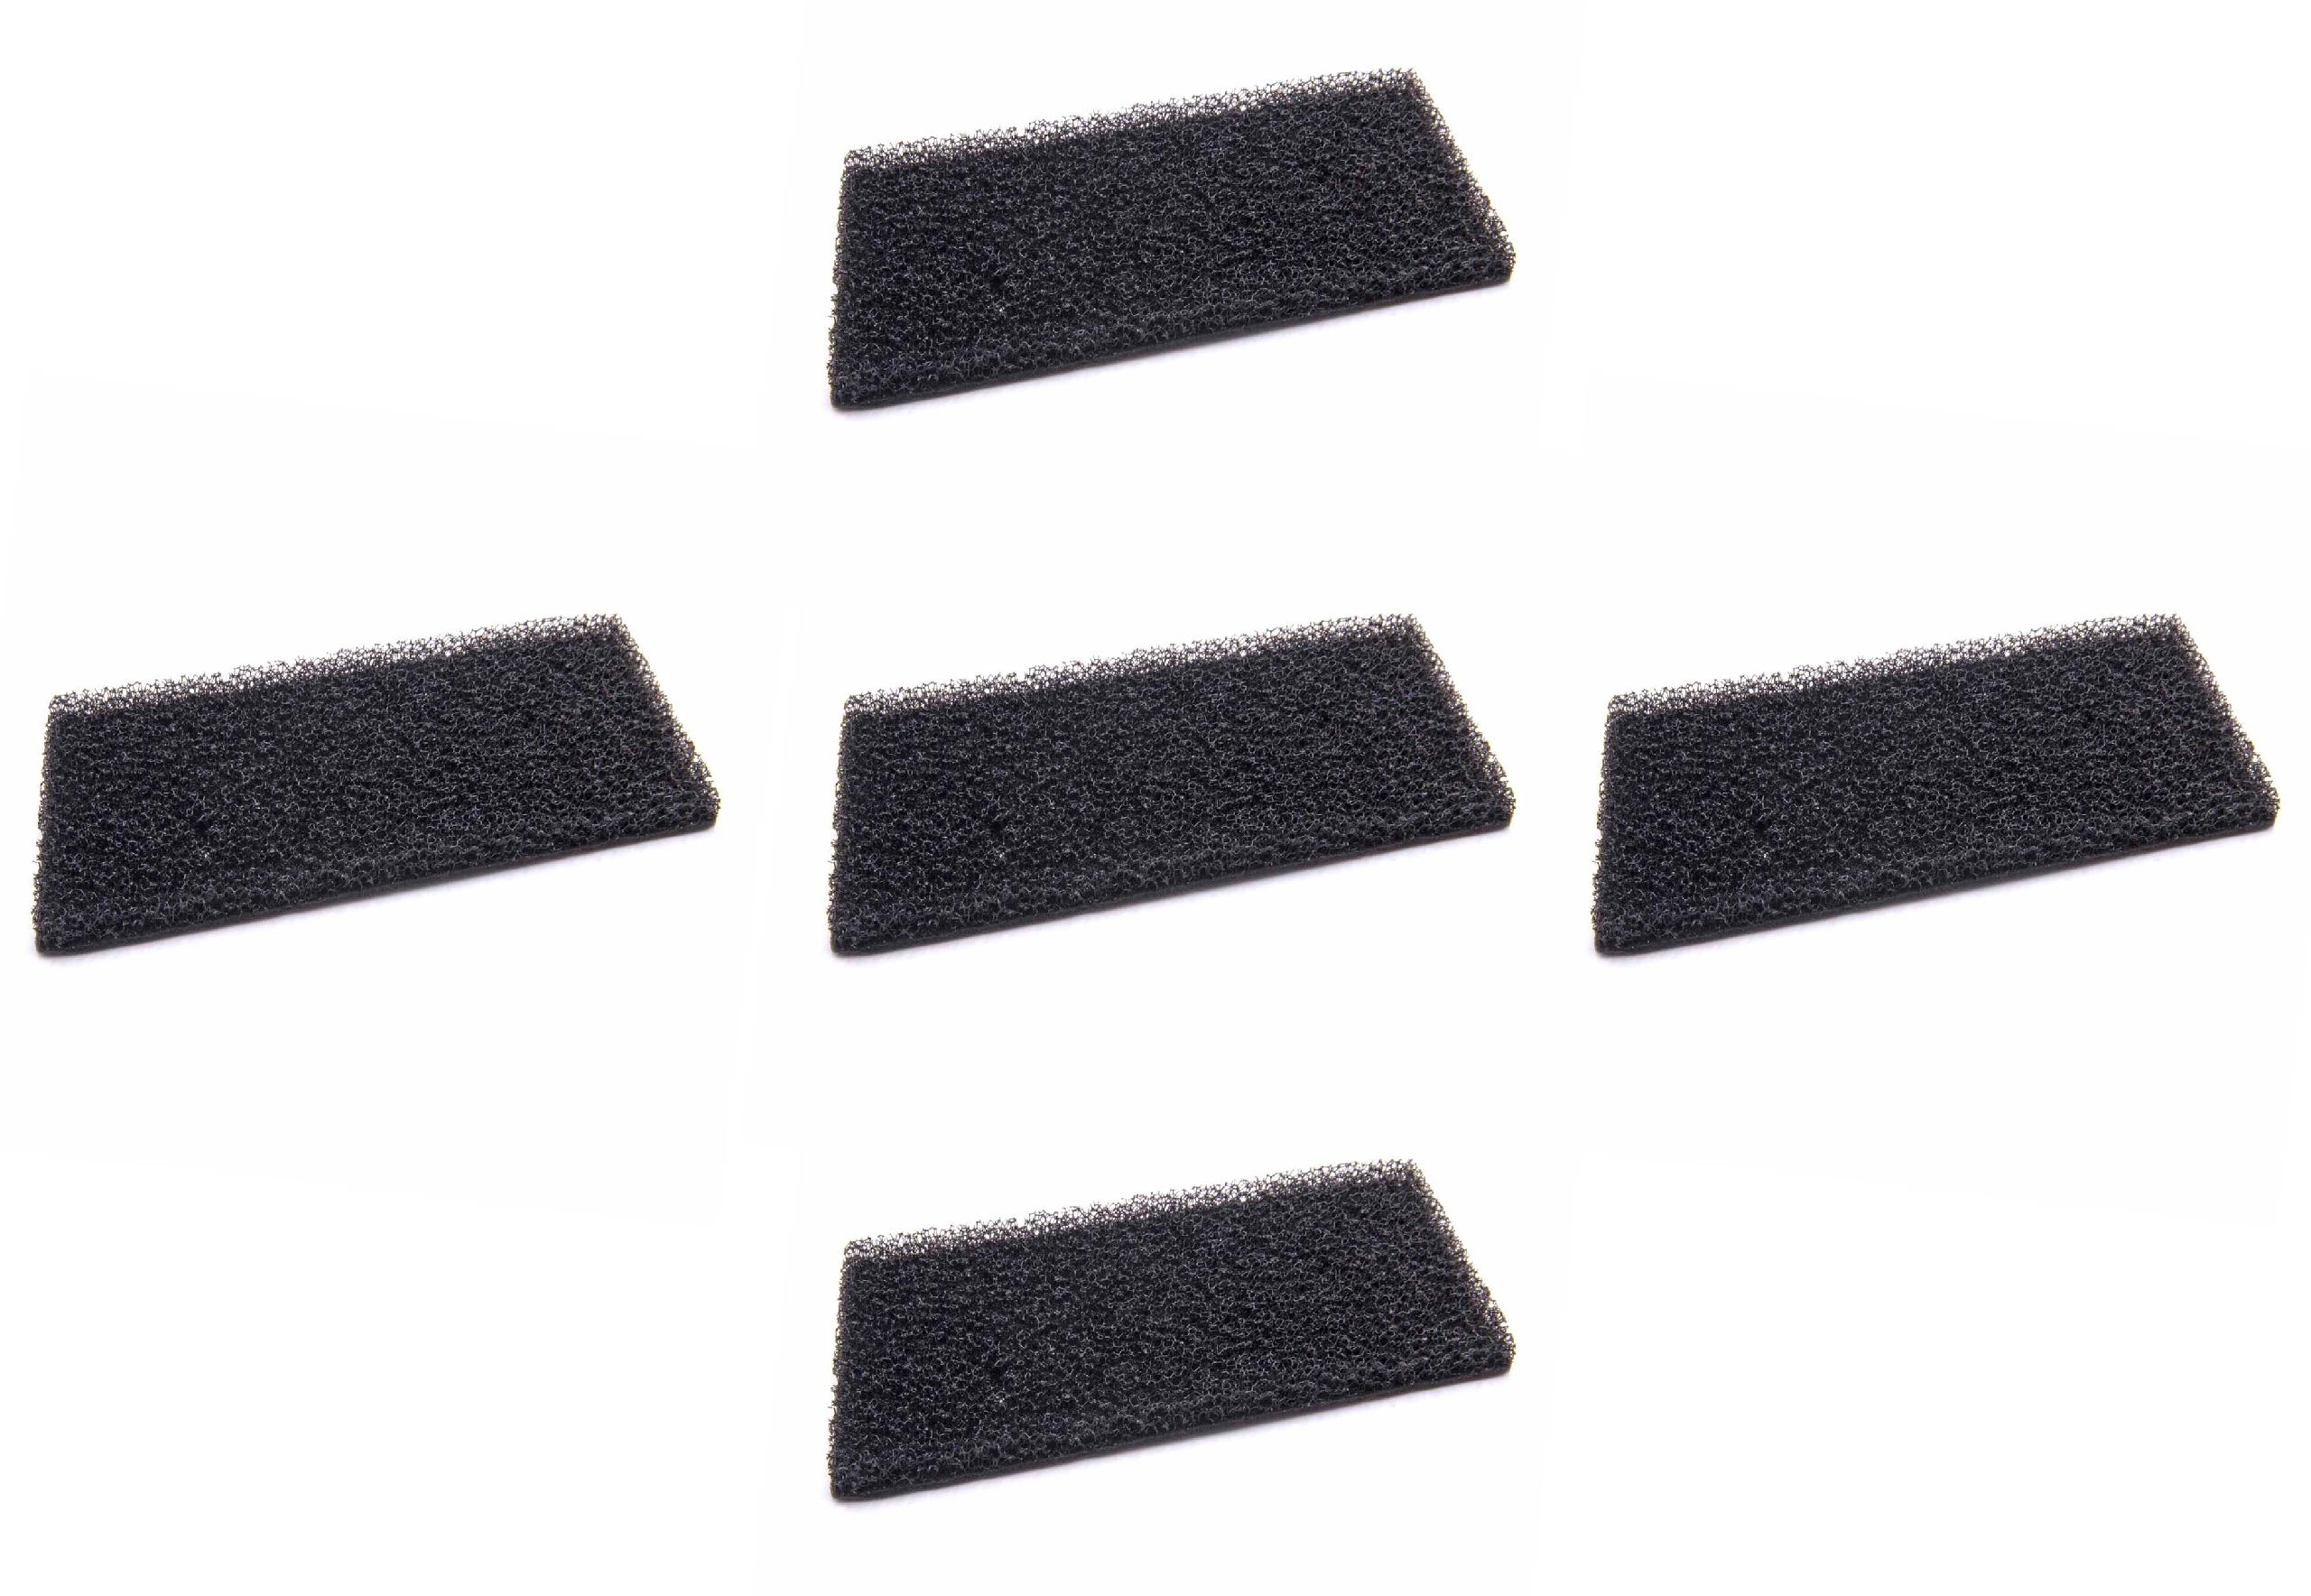 Filter Set (5x foam filter) as Replacement for Whirlpool / Bauknecht Group 481010716911 Tumble Dryer etc.